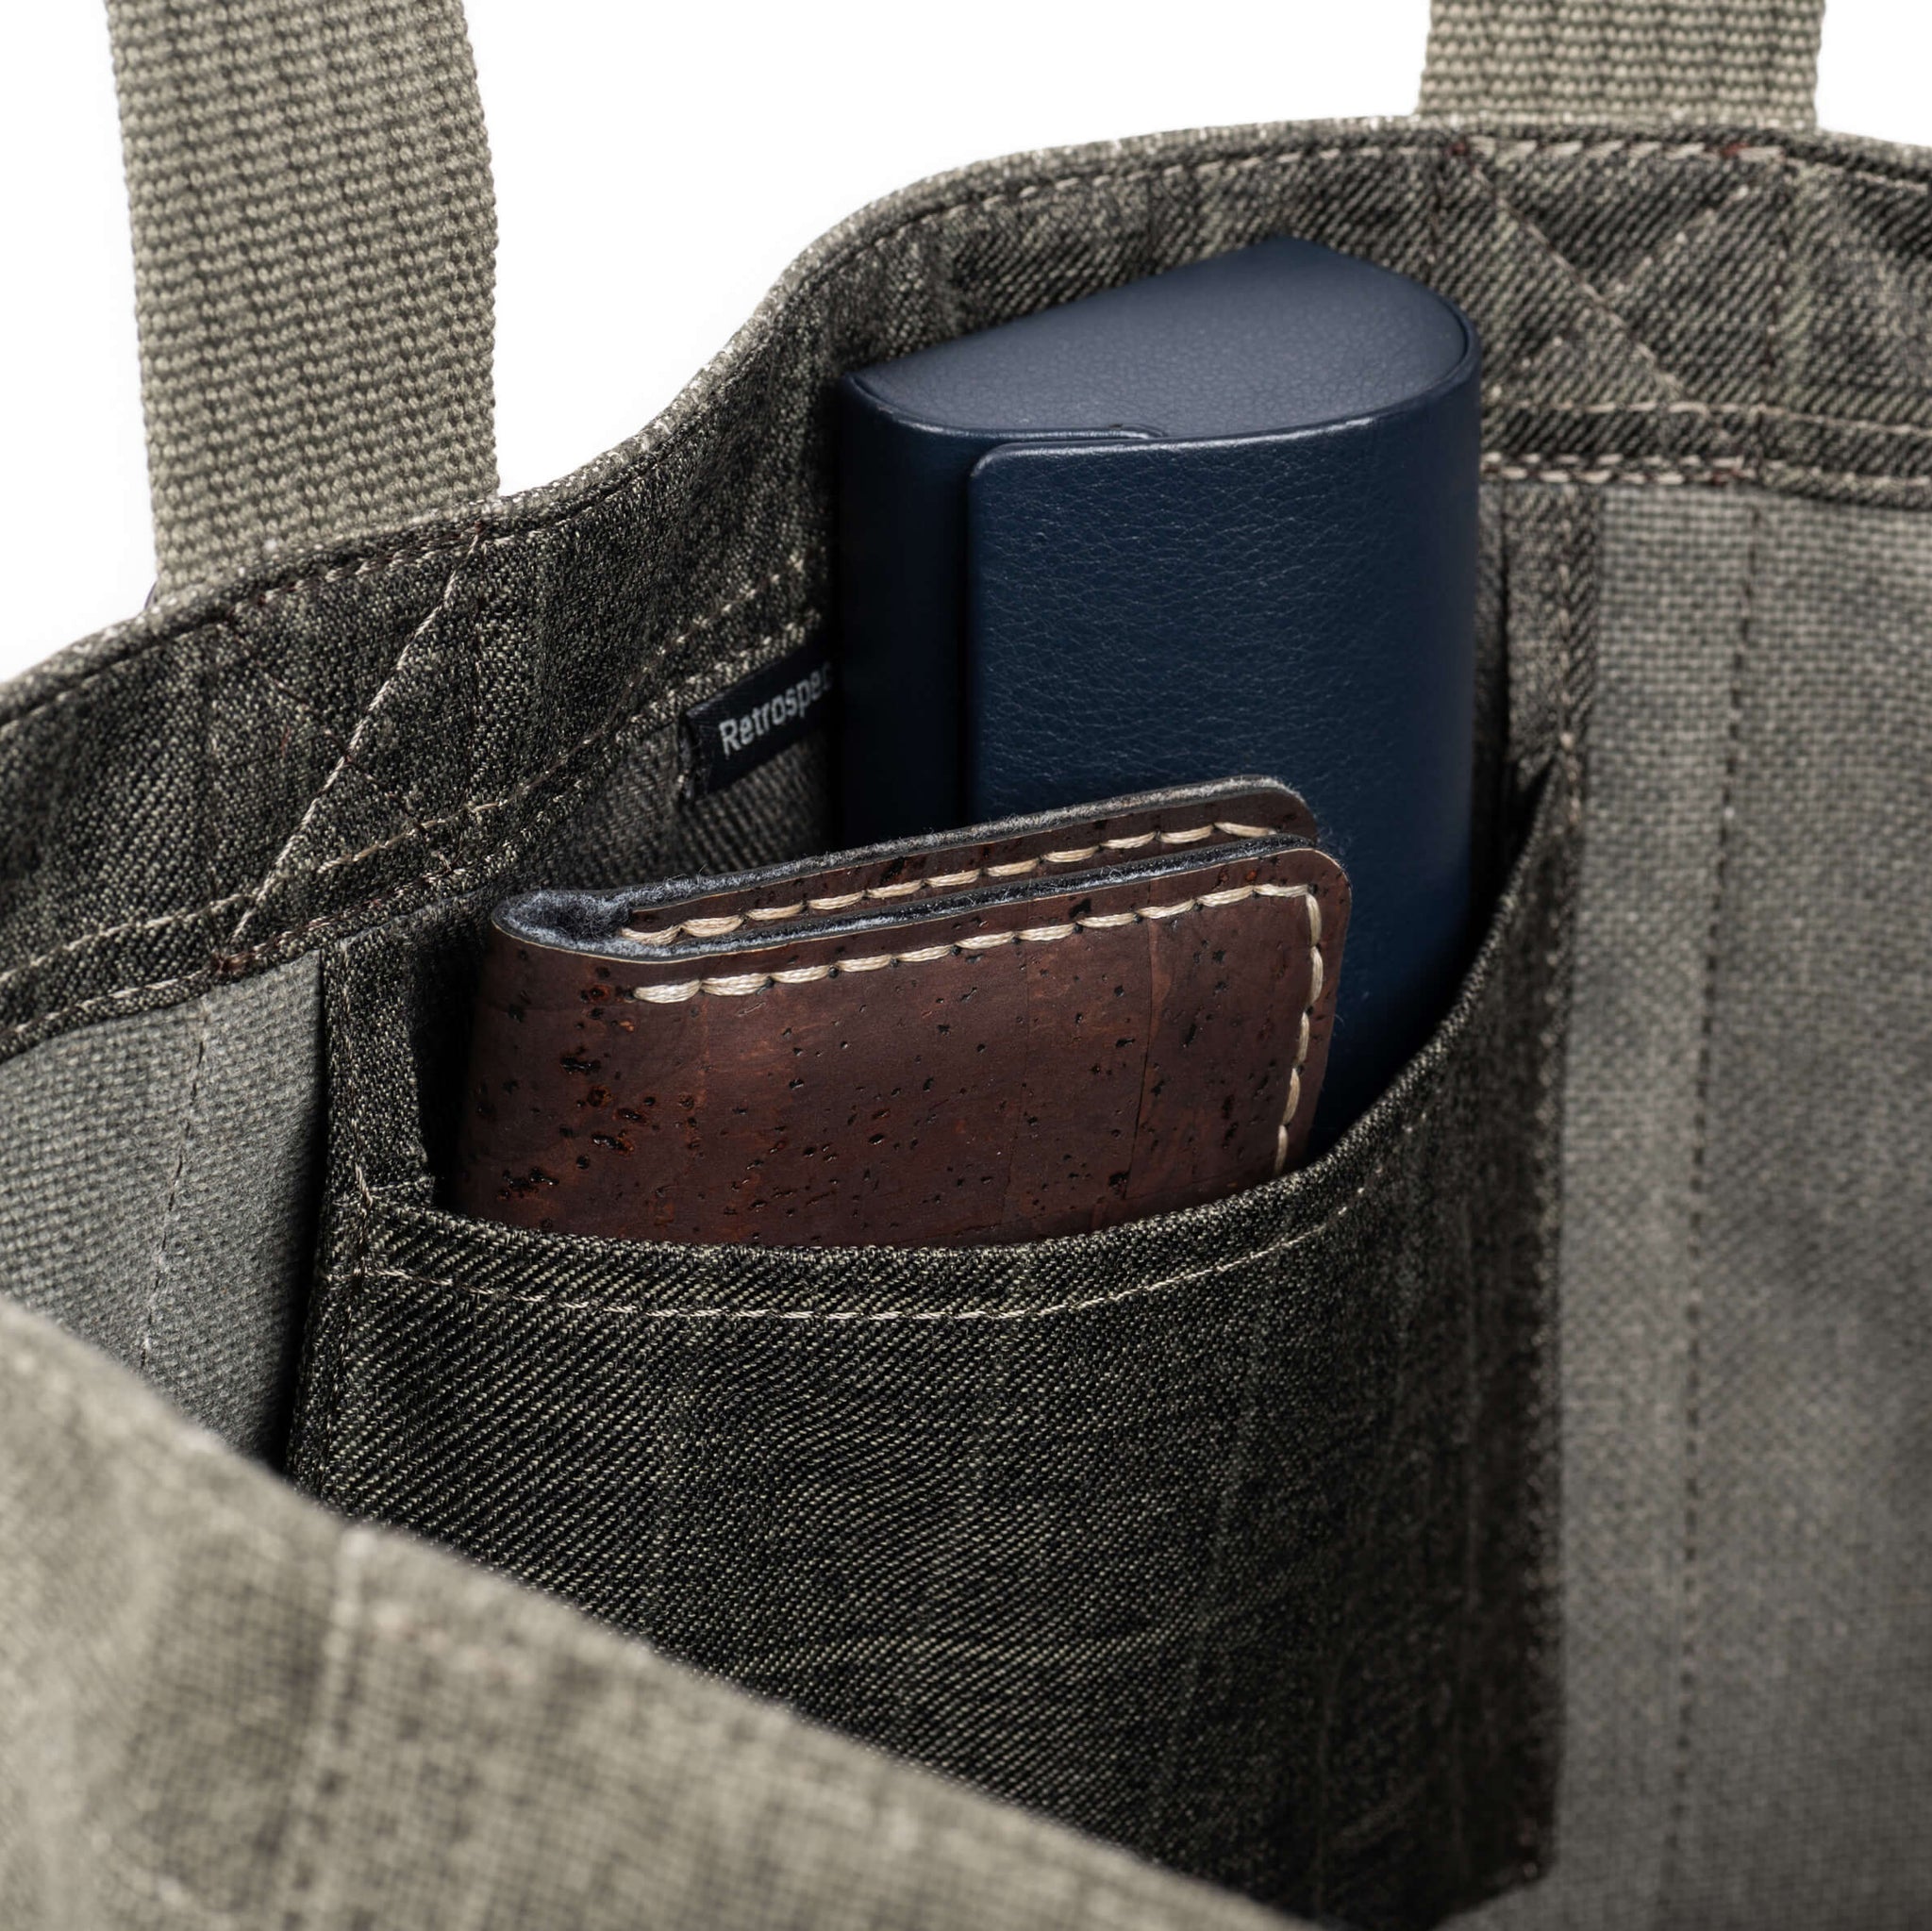 Inner stash pocket to keep important items like wallet or sunglasses from falling to the bottom of the bag